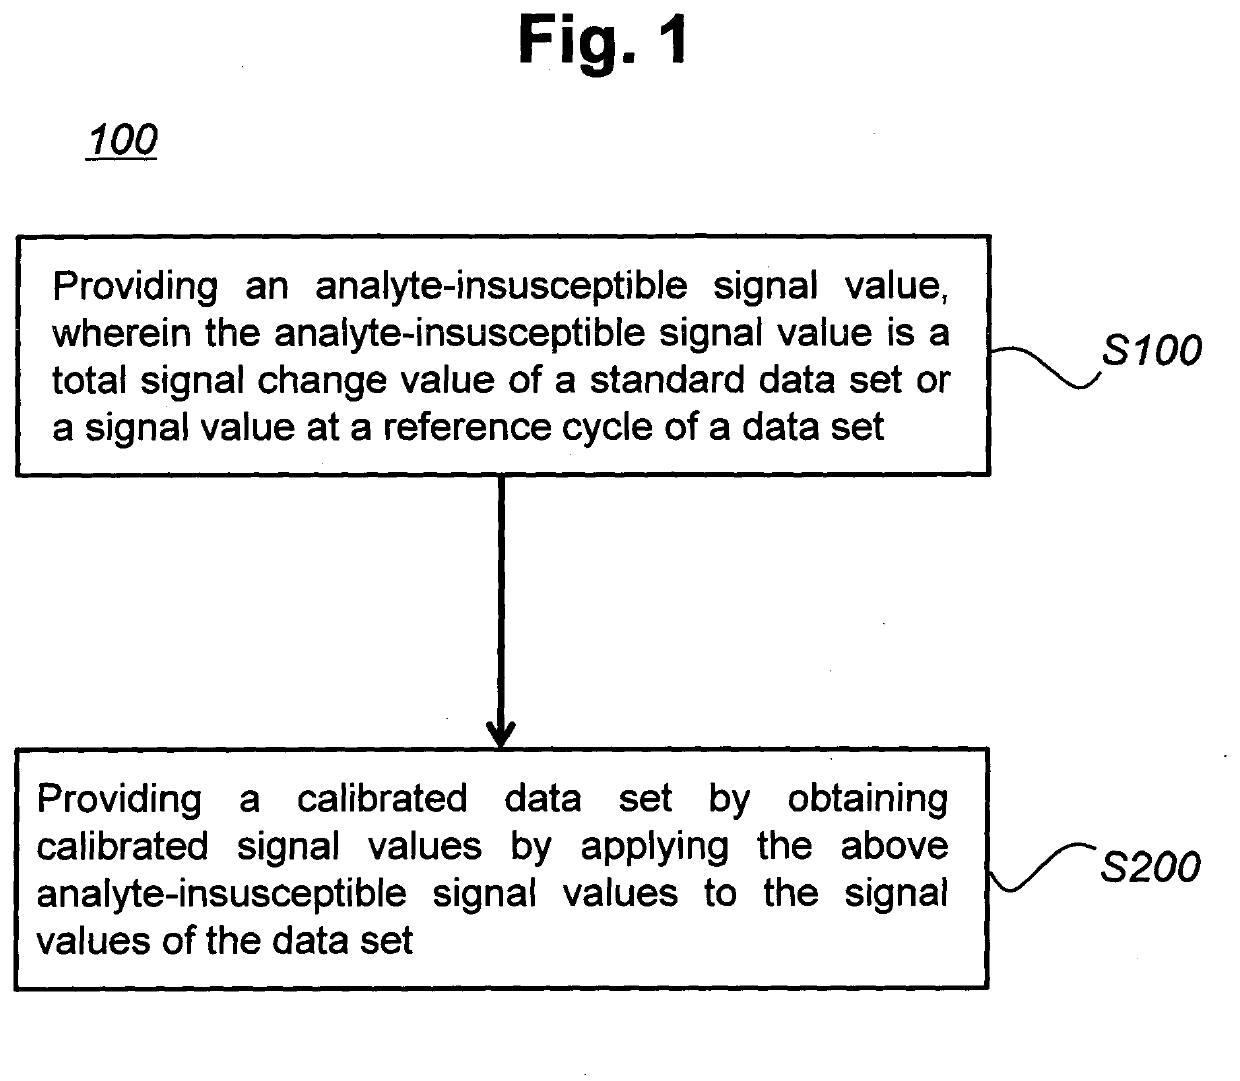 Method for calibrating a data set of a target analyte using an analyte-insusceptible signal value